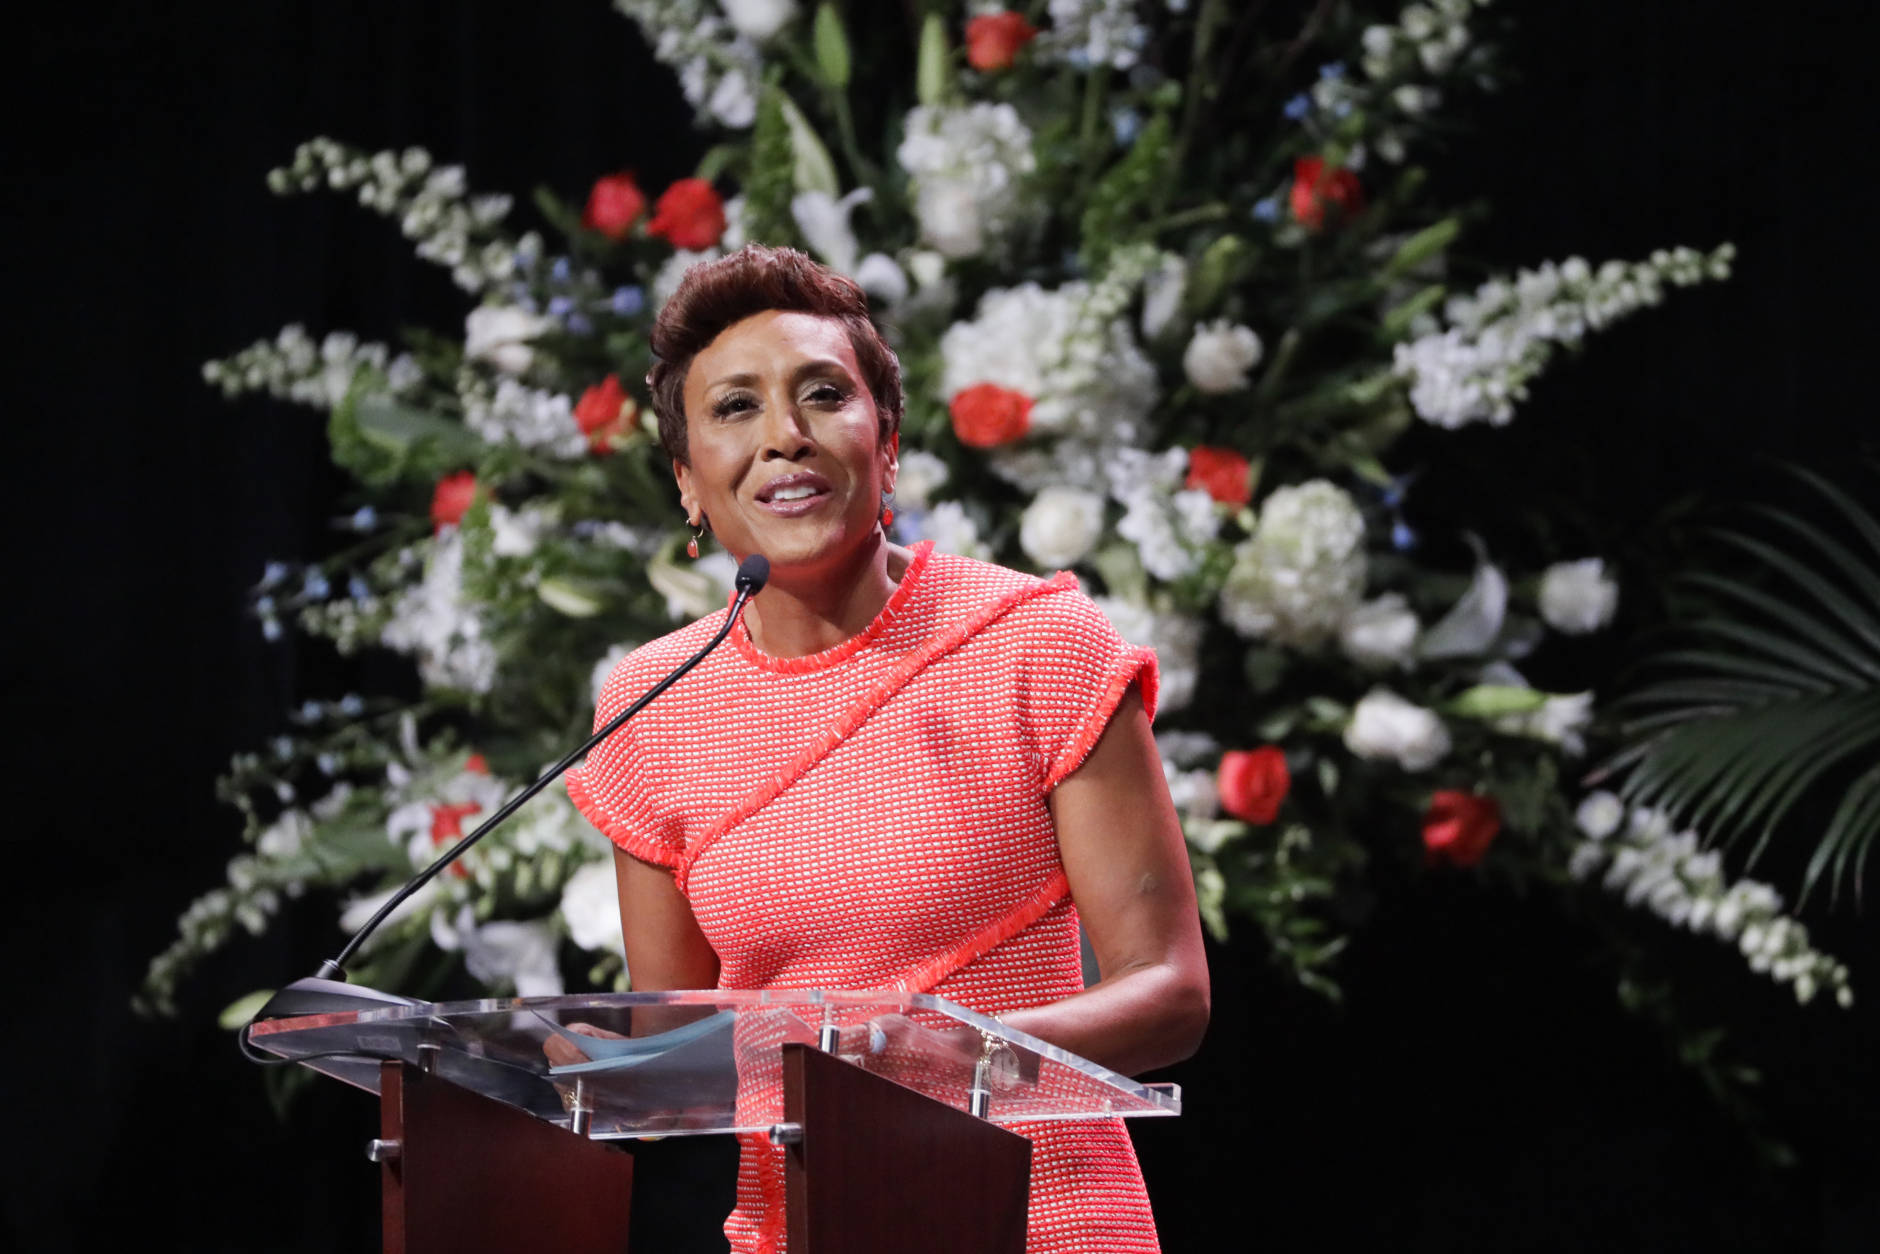 Emcee Robin Roberts speaks during a ceremony to celebrate the life of former Tennessee women's basketball coach Pat Summitt Thursday, July 14, 2016, in Knoxville, Tenn. Summitt died June 28 at the age of 64. (AP Photo/Mark Humphrey, Pool)